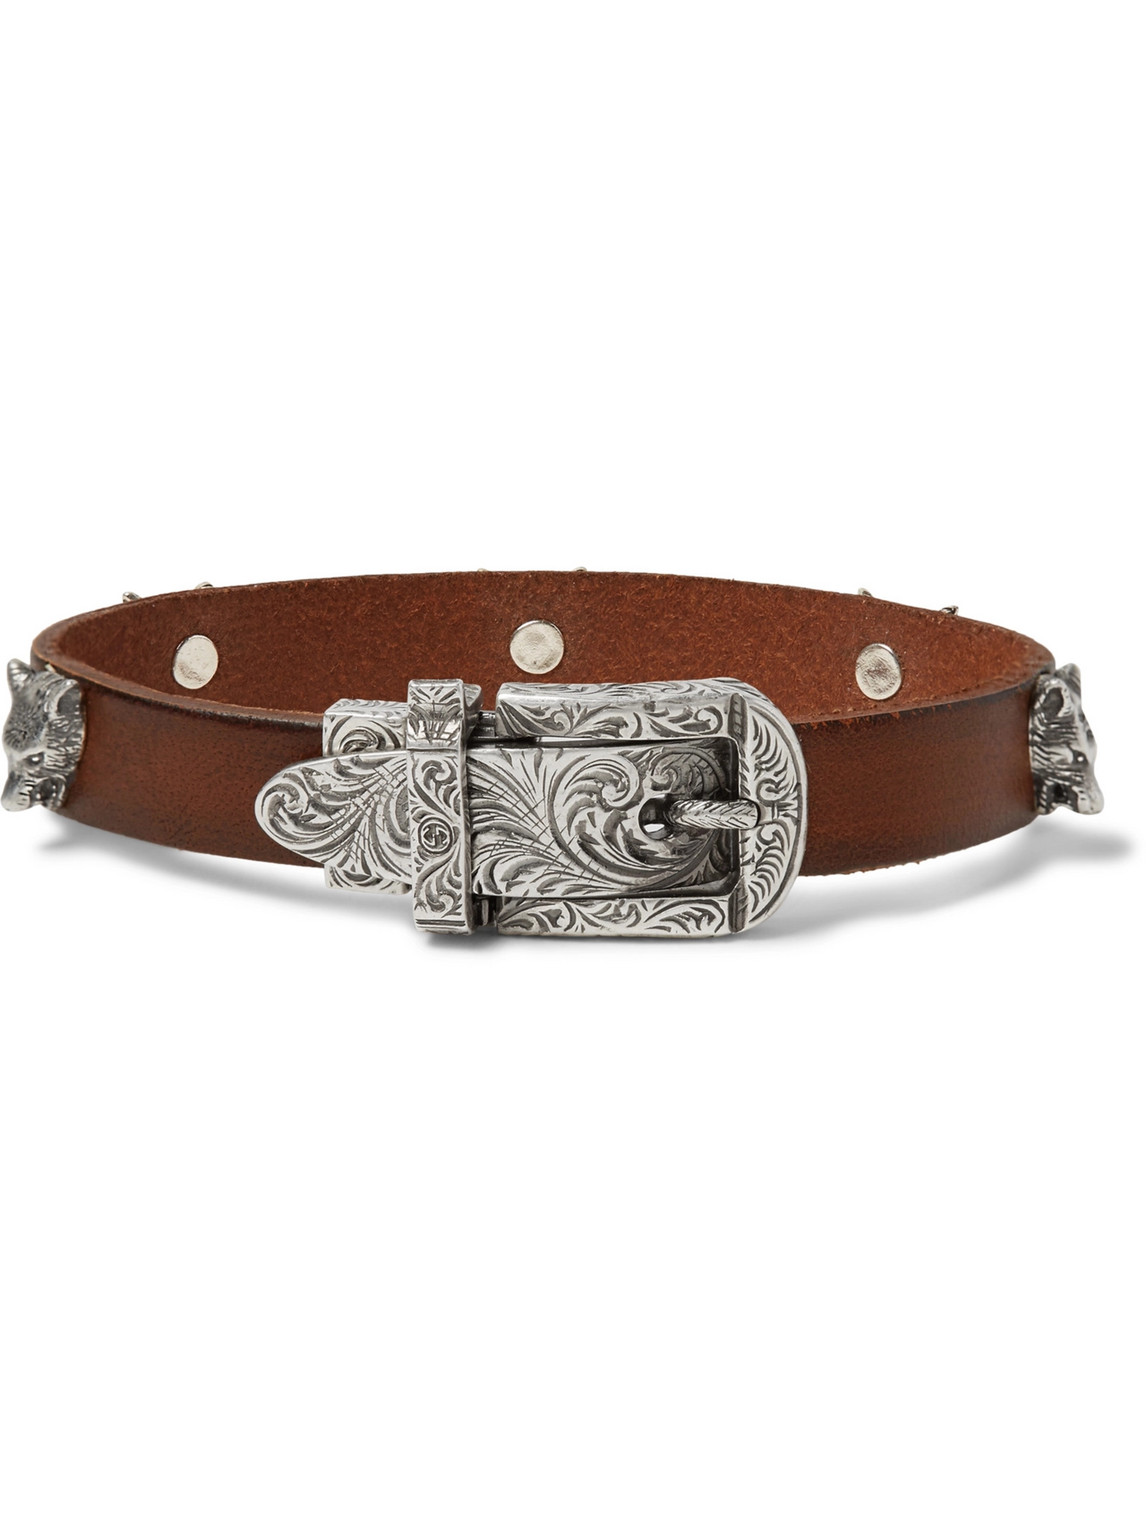 Burnished-Leather and Silver-Tone Bracelet